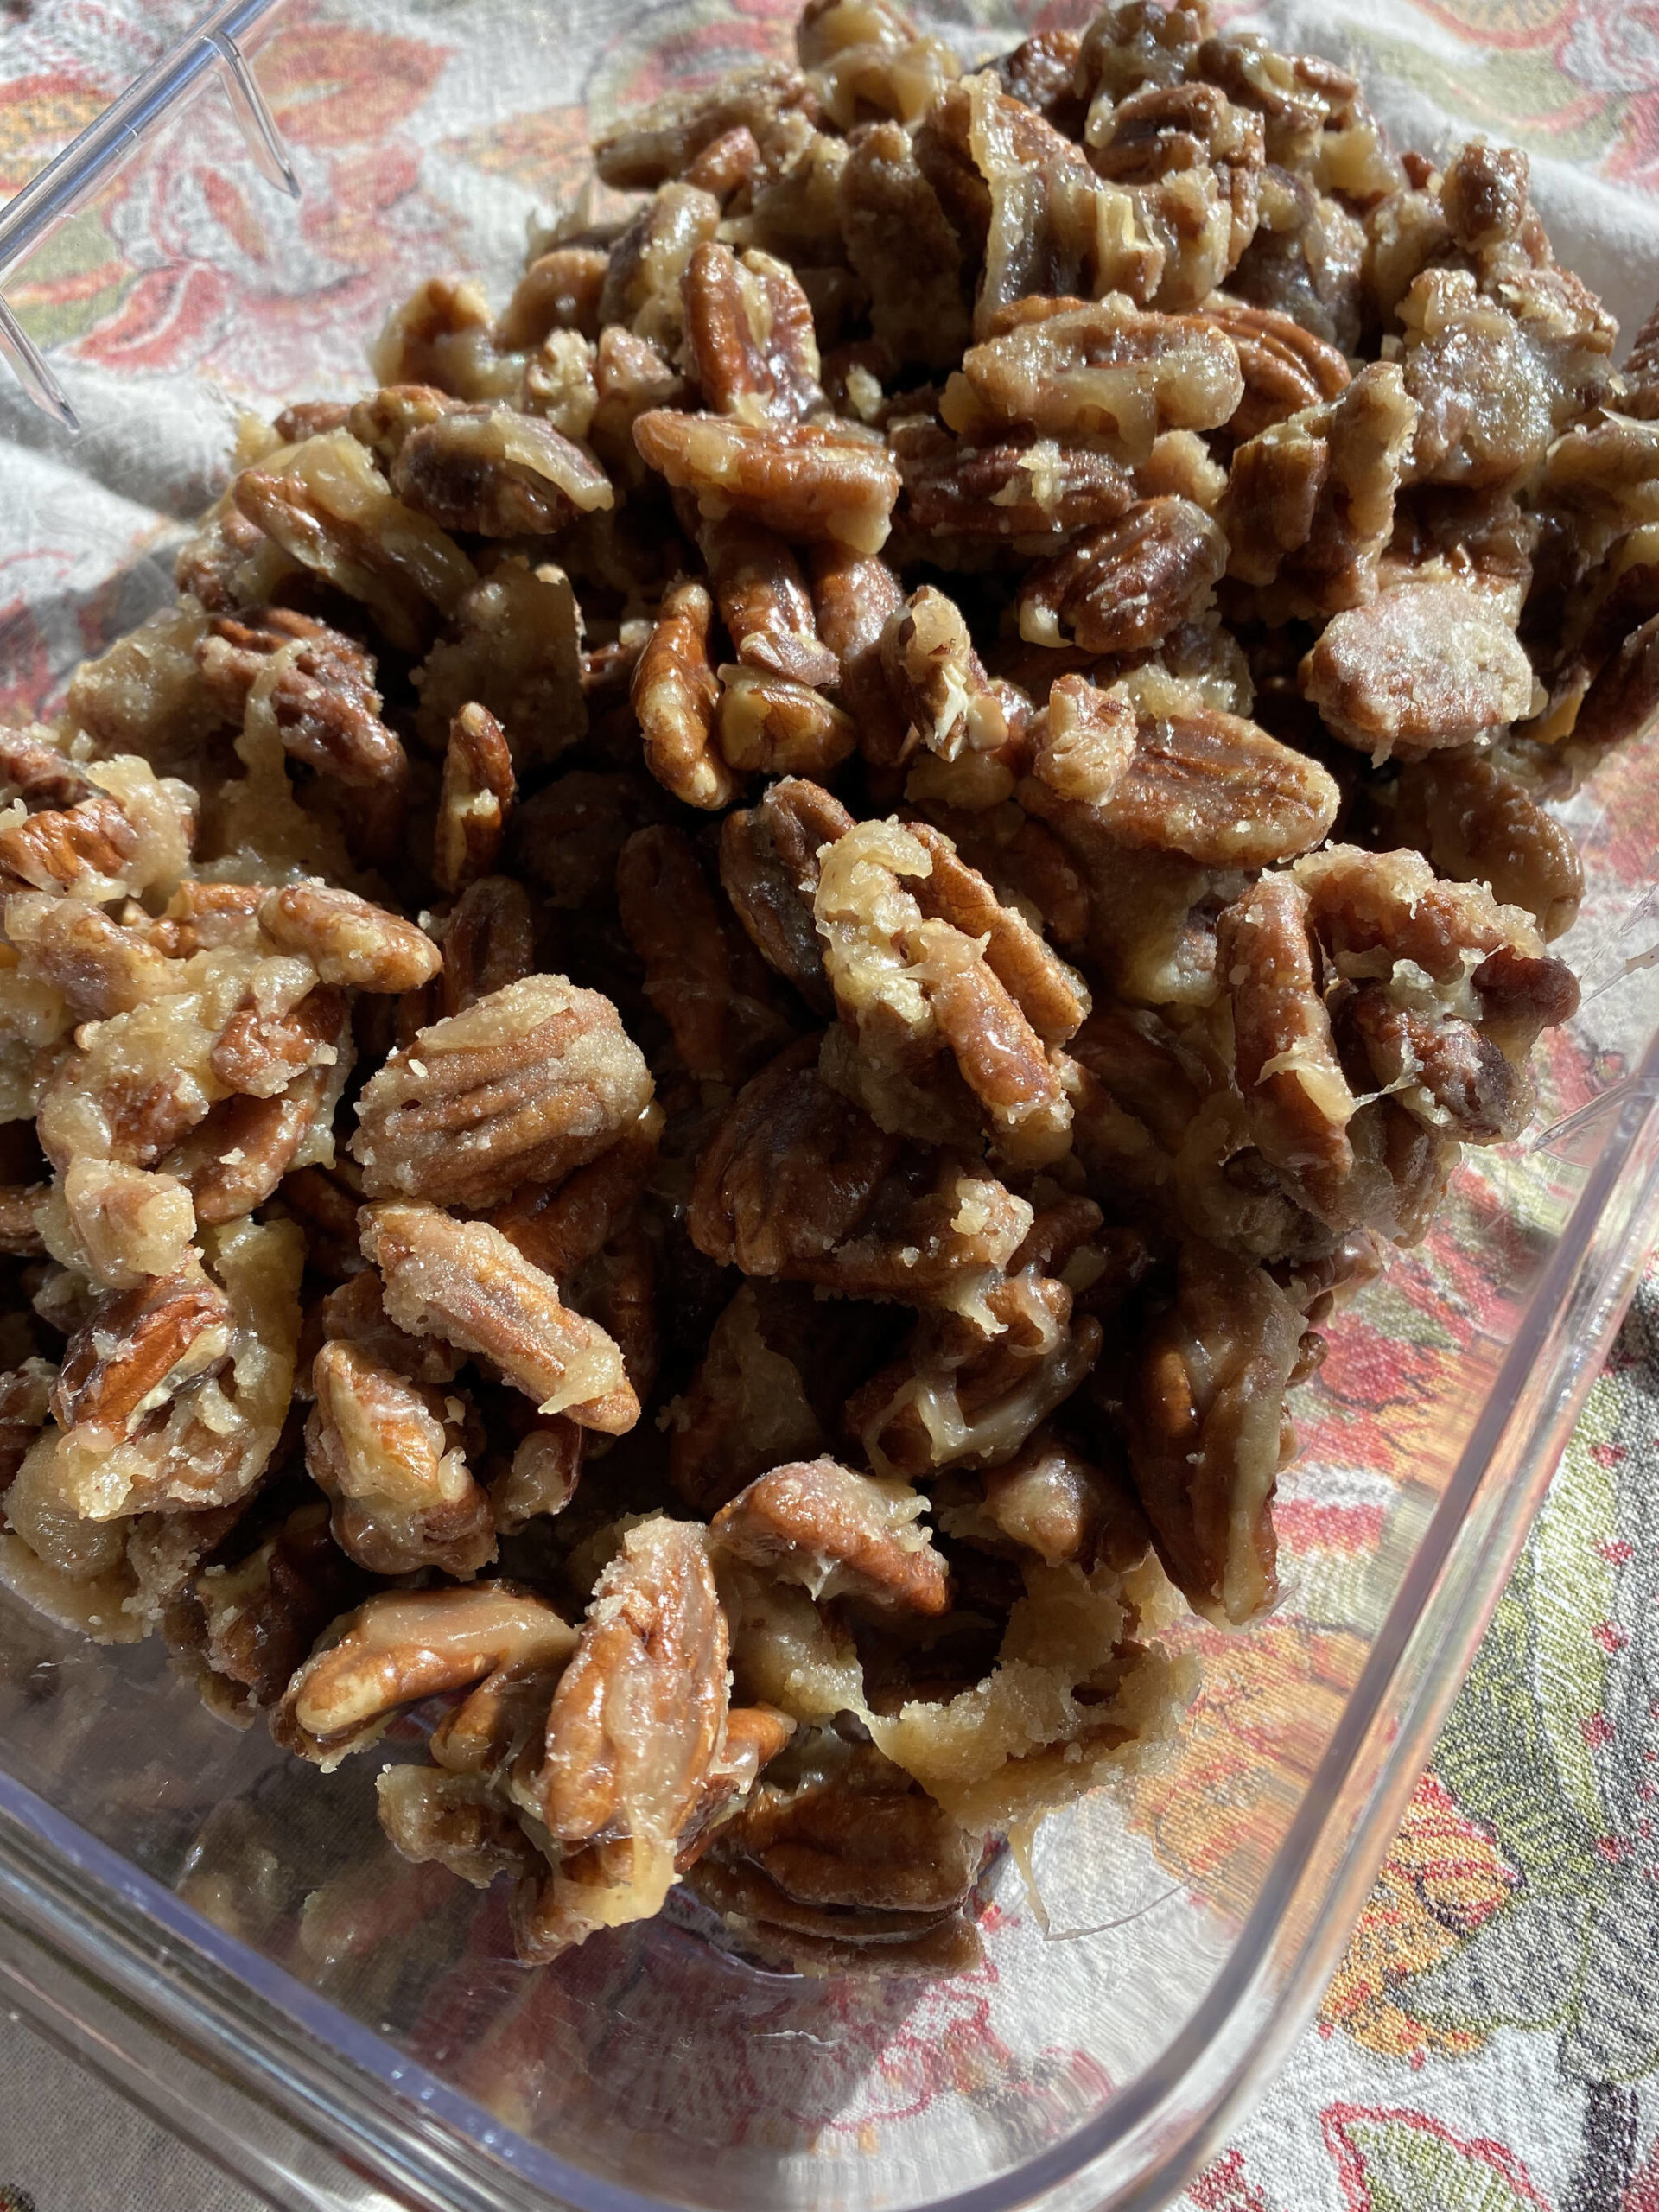 Candy pecans make a sweet snack to enjoy on excursions. (Photo by Tressa Dale/Peninsula Clarion)